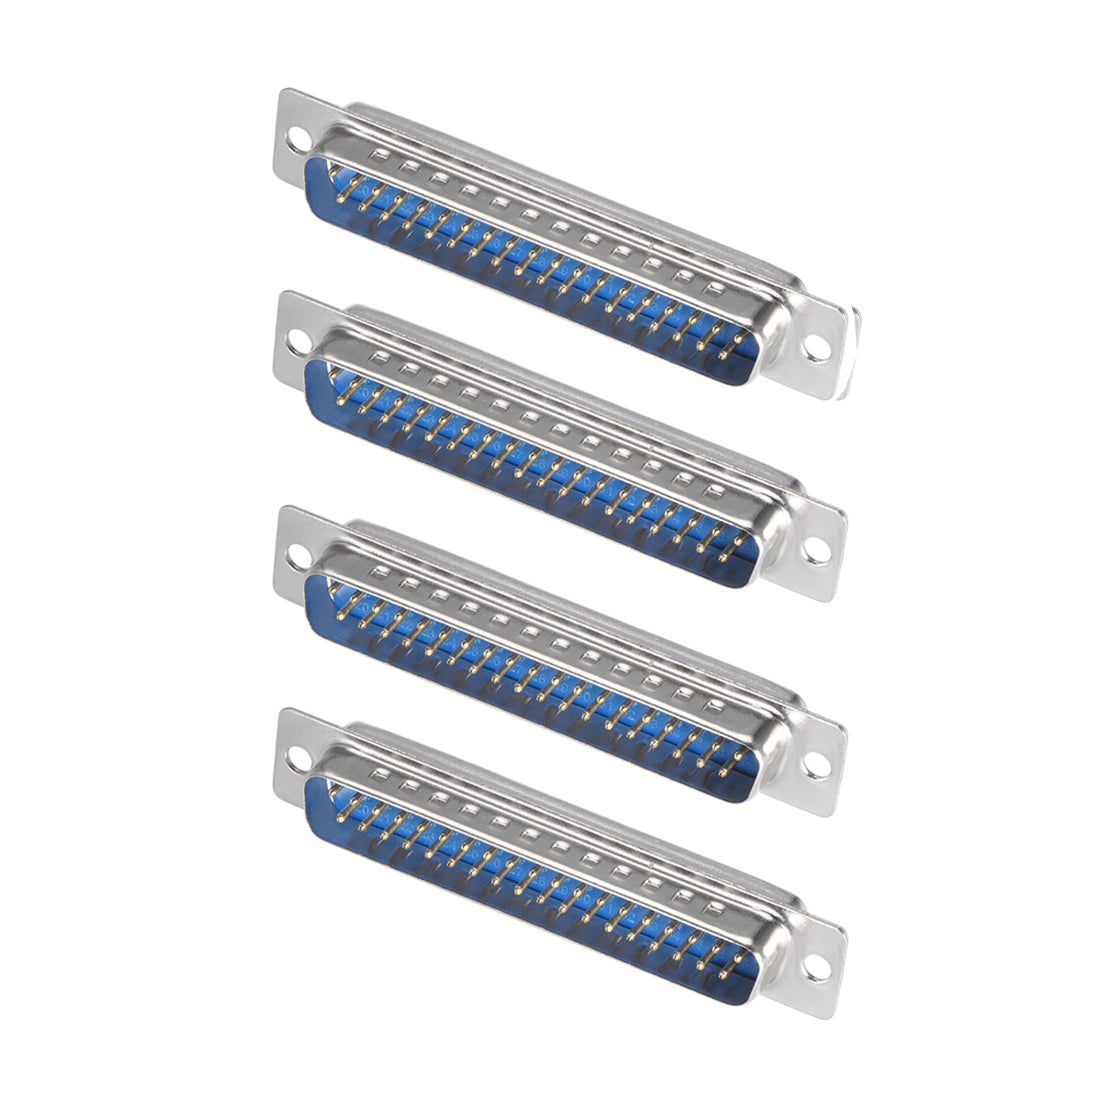 uxcell Uxcell D-sub Connector Male Plug 37-pin 2-row Port Terminal Breakout Solder Type for Mechanical Equipment CNC Computers Blue 4pcs